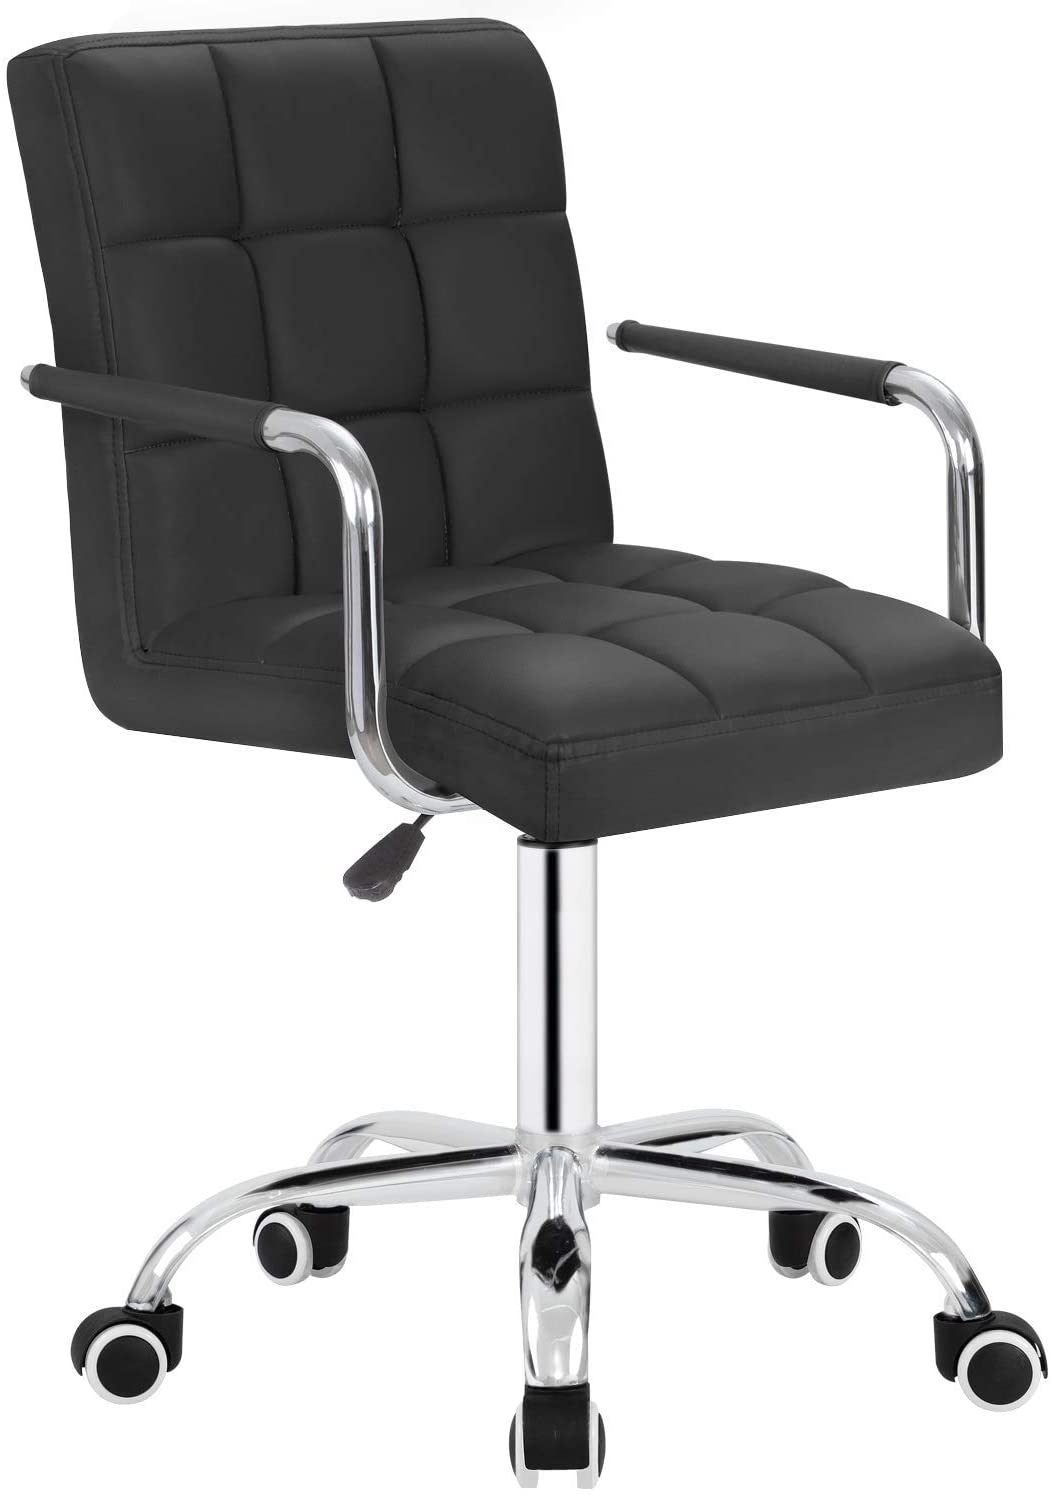 Mid-Back Office Task Chair Ribbed PU Leather Executive Chair Modern Adjustable Home Desk Chair Retro Comfortable Work Chair 360 Degree Swivel with Arms (Black)